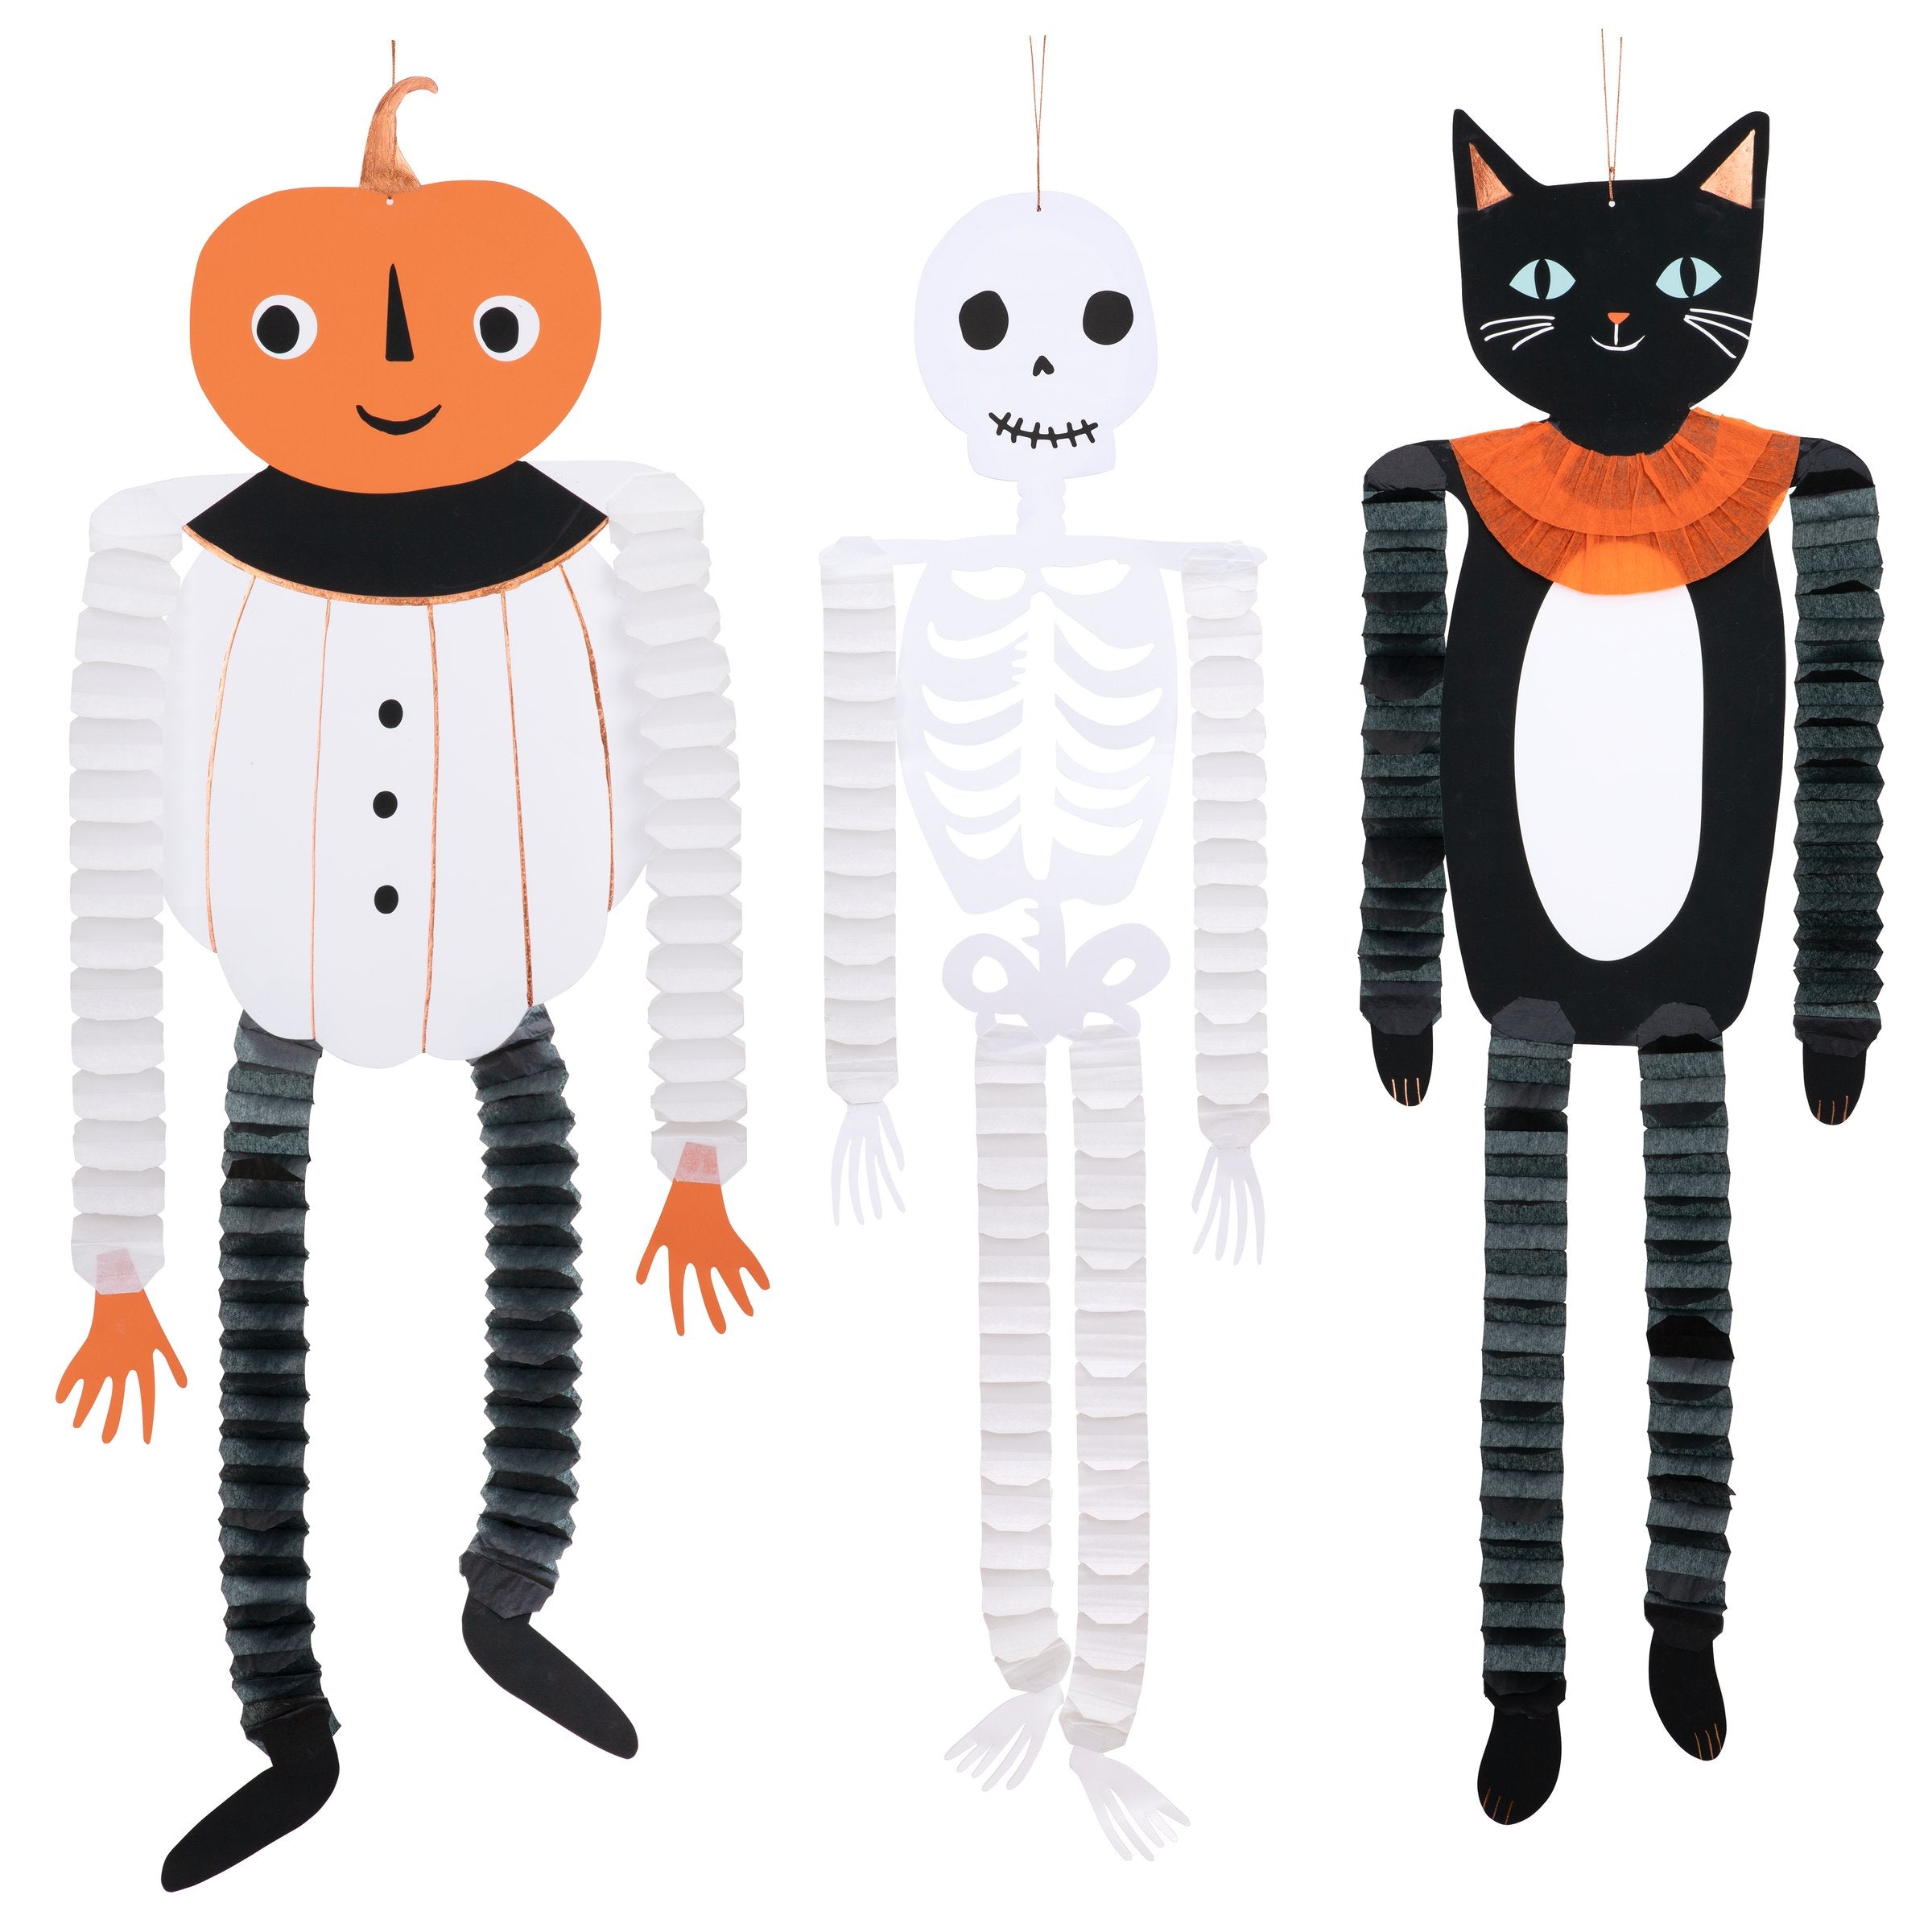 Our Halloween party decorations for kids are ideal to hang in doorways, in the porch or in your party room.